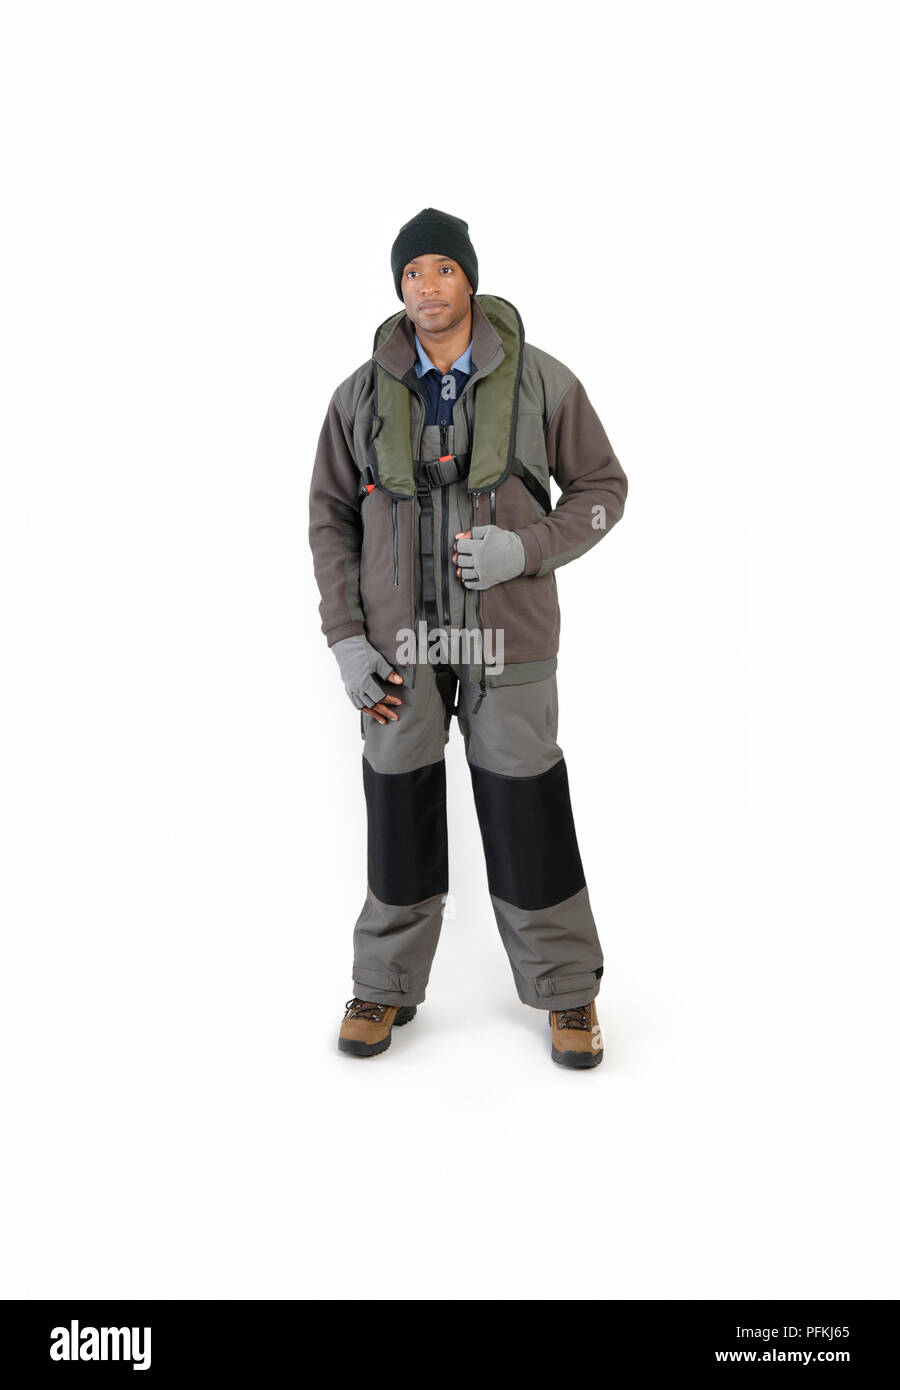 Man dressed for boat-fishing, wearing waterproof clothing and life jacket Stock Photo